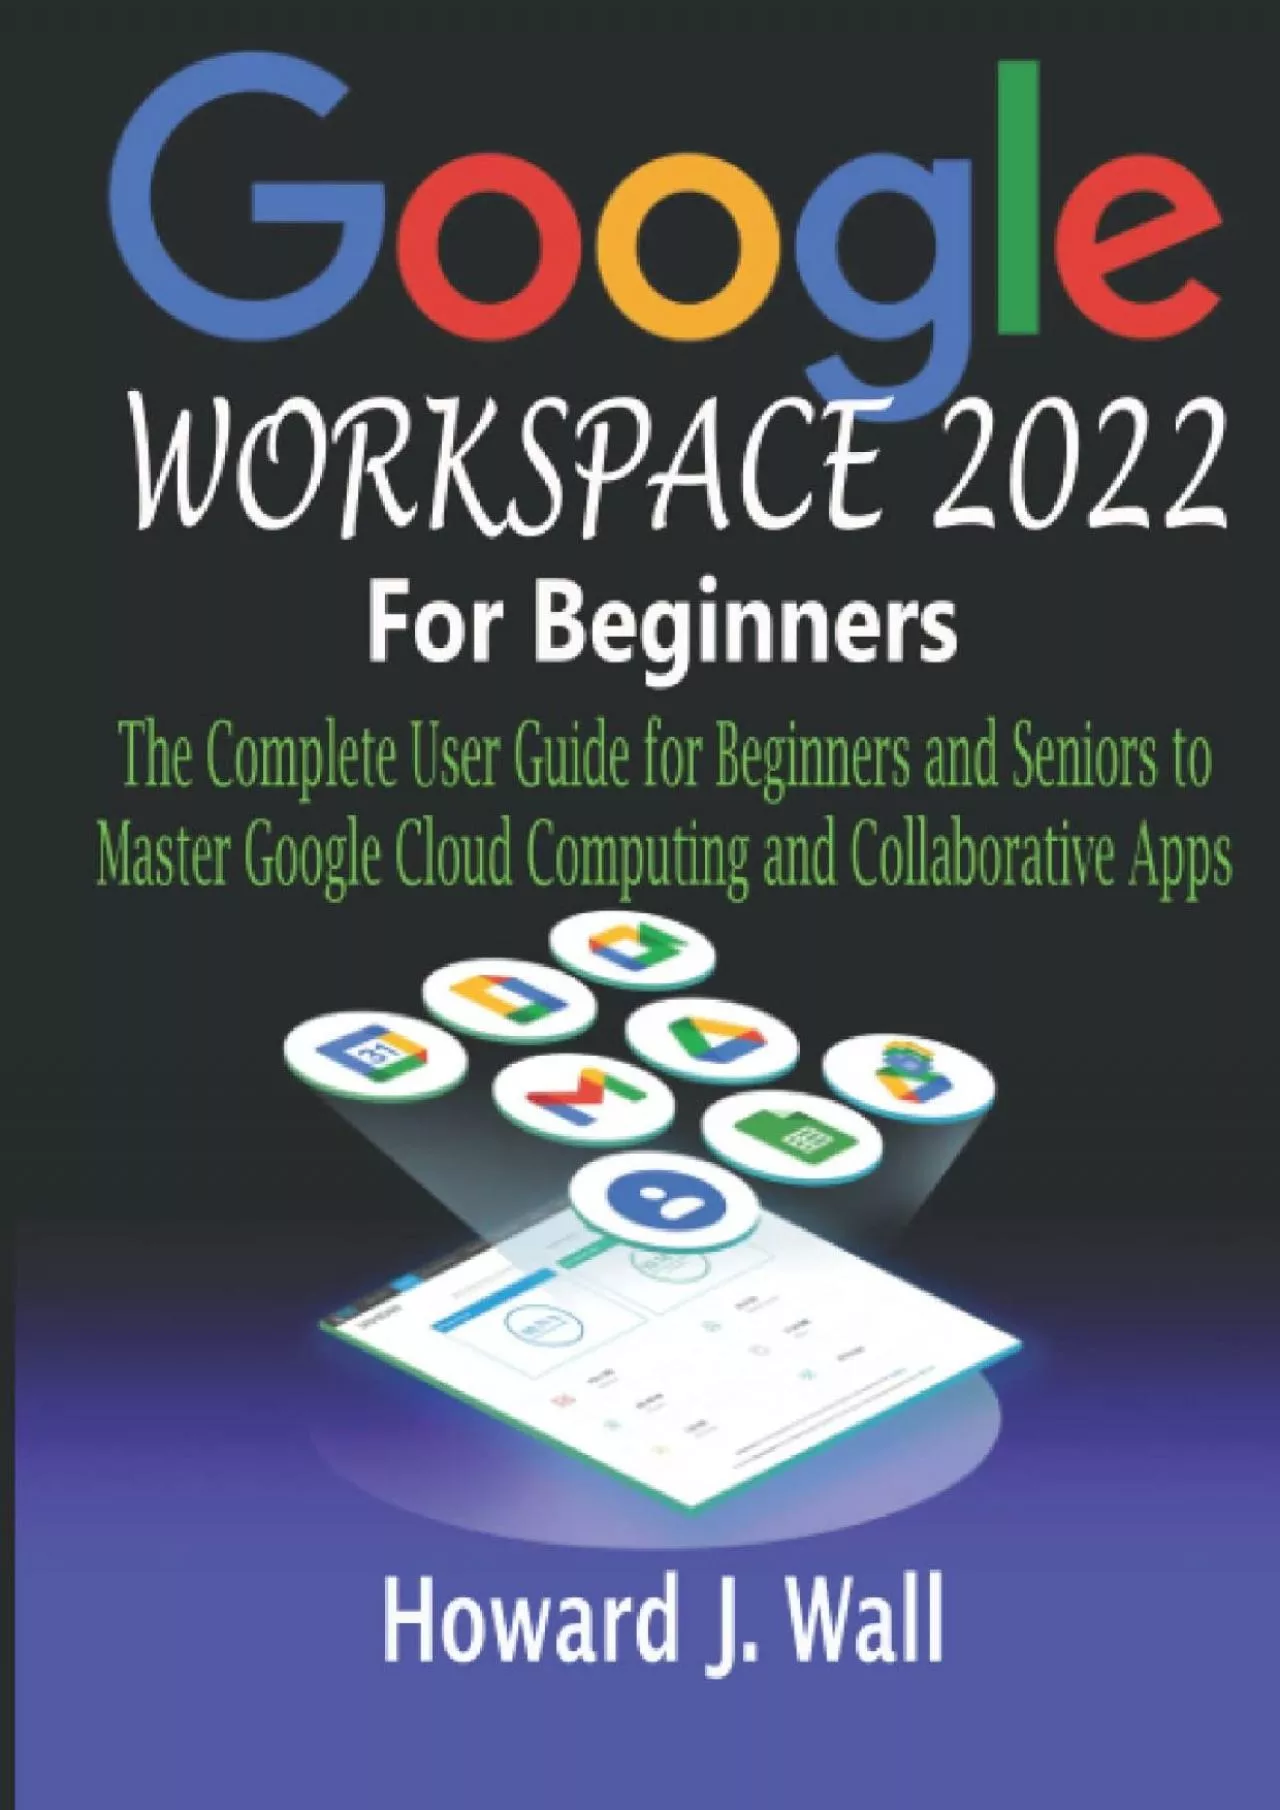 (DOWNLOAD)-GOOGLE WORKSPACE 2022 For Beginners: The Complete User Guide for Beginners